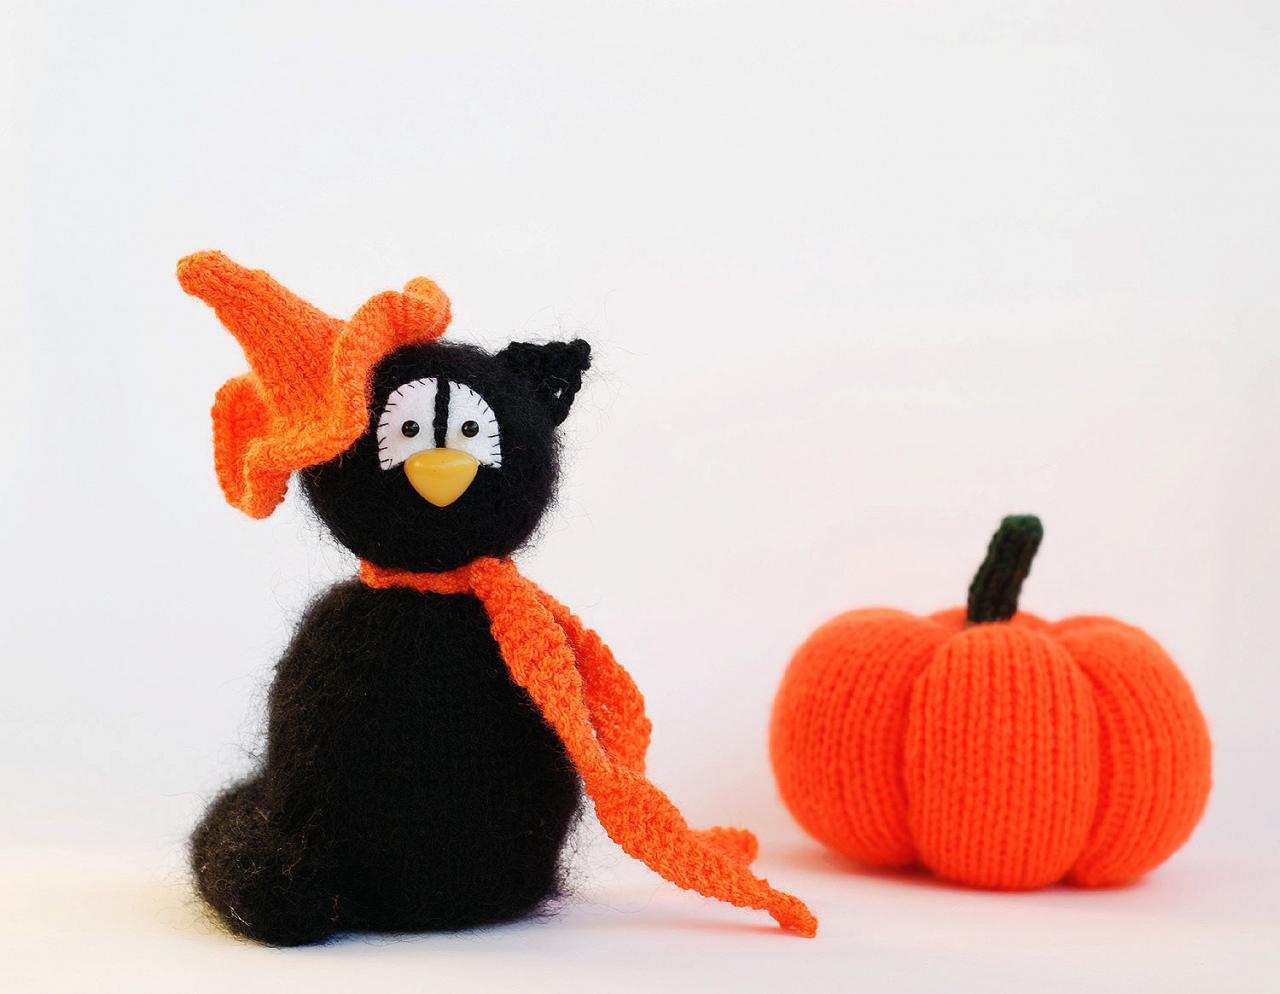 Black Cat In The Orange Scarf. Halloween Toy. Decoration For Halloween